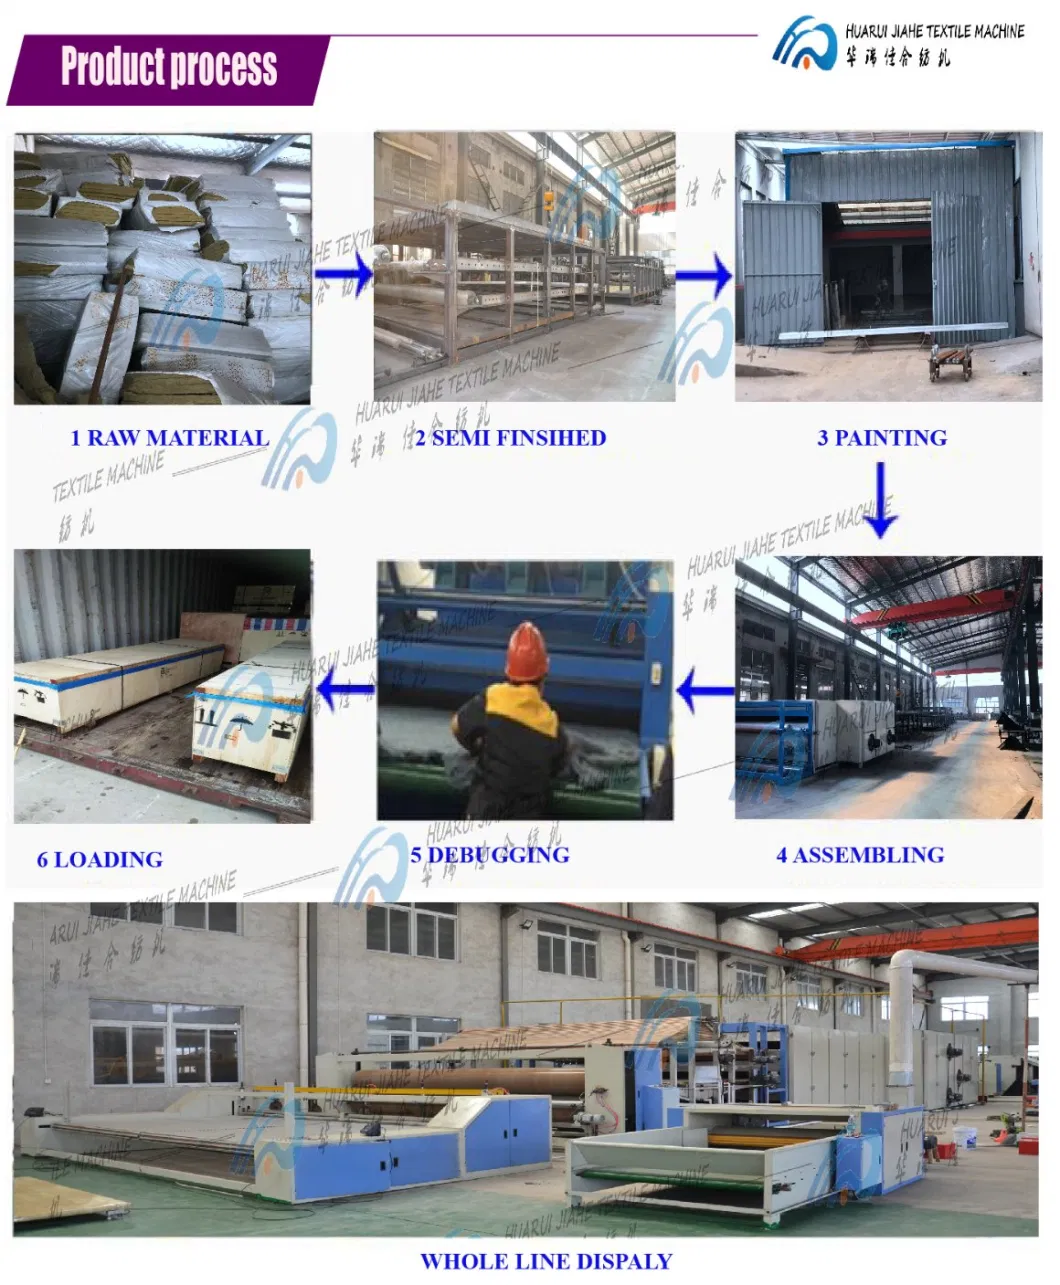 Normal Temperature Jet Hank Dyeing Machine Continuous Dyeing Machine Jet Dyeing Machine Dyed and Washed in Water Factory Dyeing Machine Manufacture